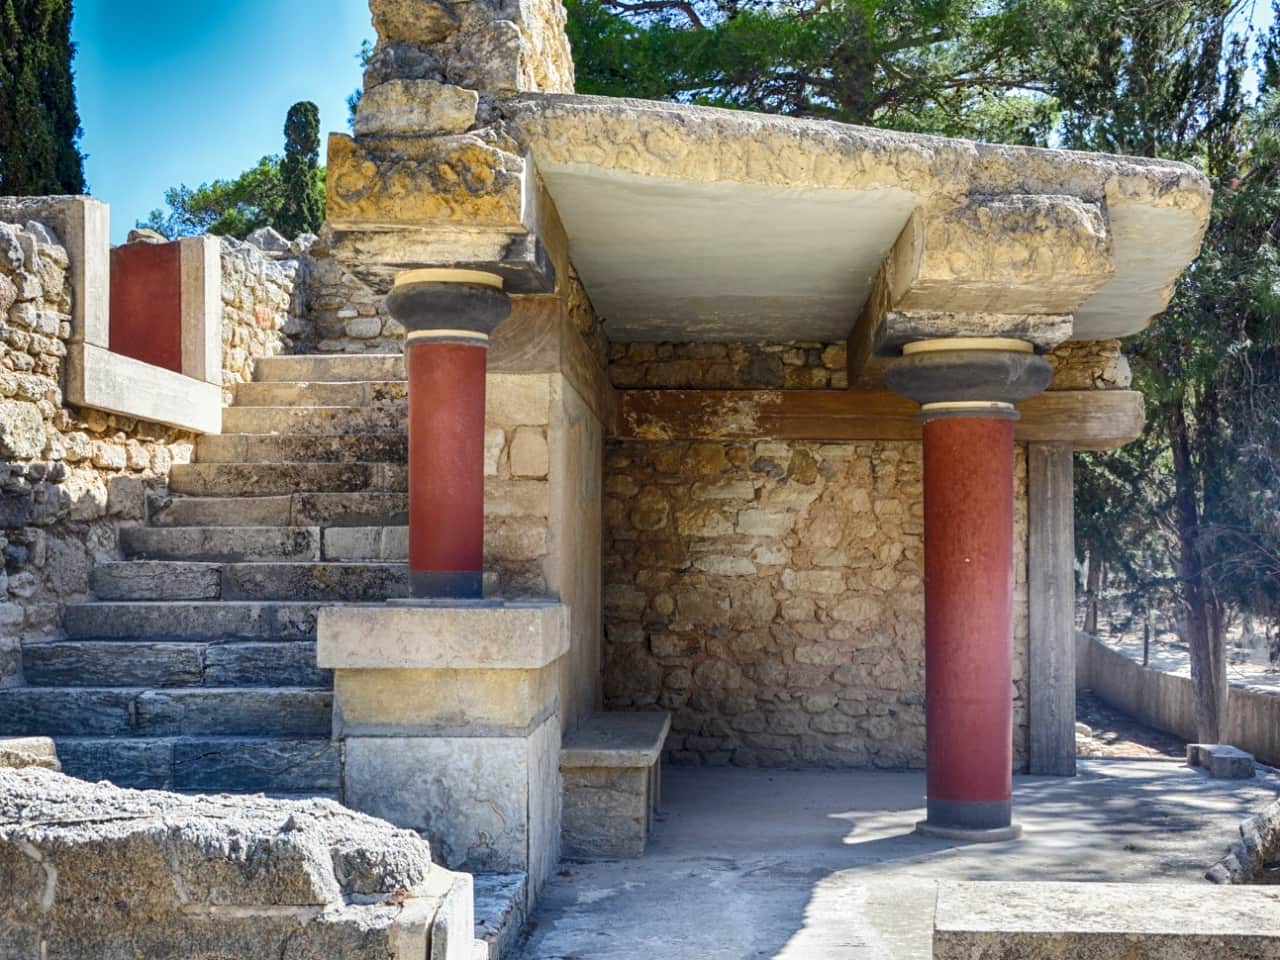 Shore Excursion Heraklion Knossos Palace & Museum, shore excursion iraklion crete knossos museum, best cultural tour heraklion crete, tour with transfer knossos archaeological museum, expert local guide professional and licensed, cruise ship excursion